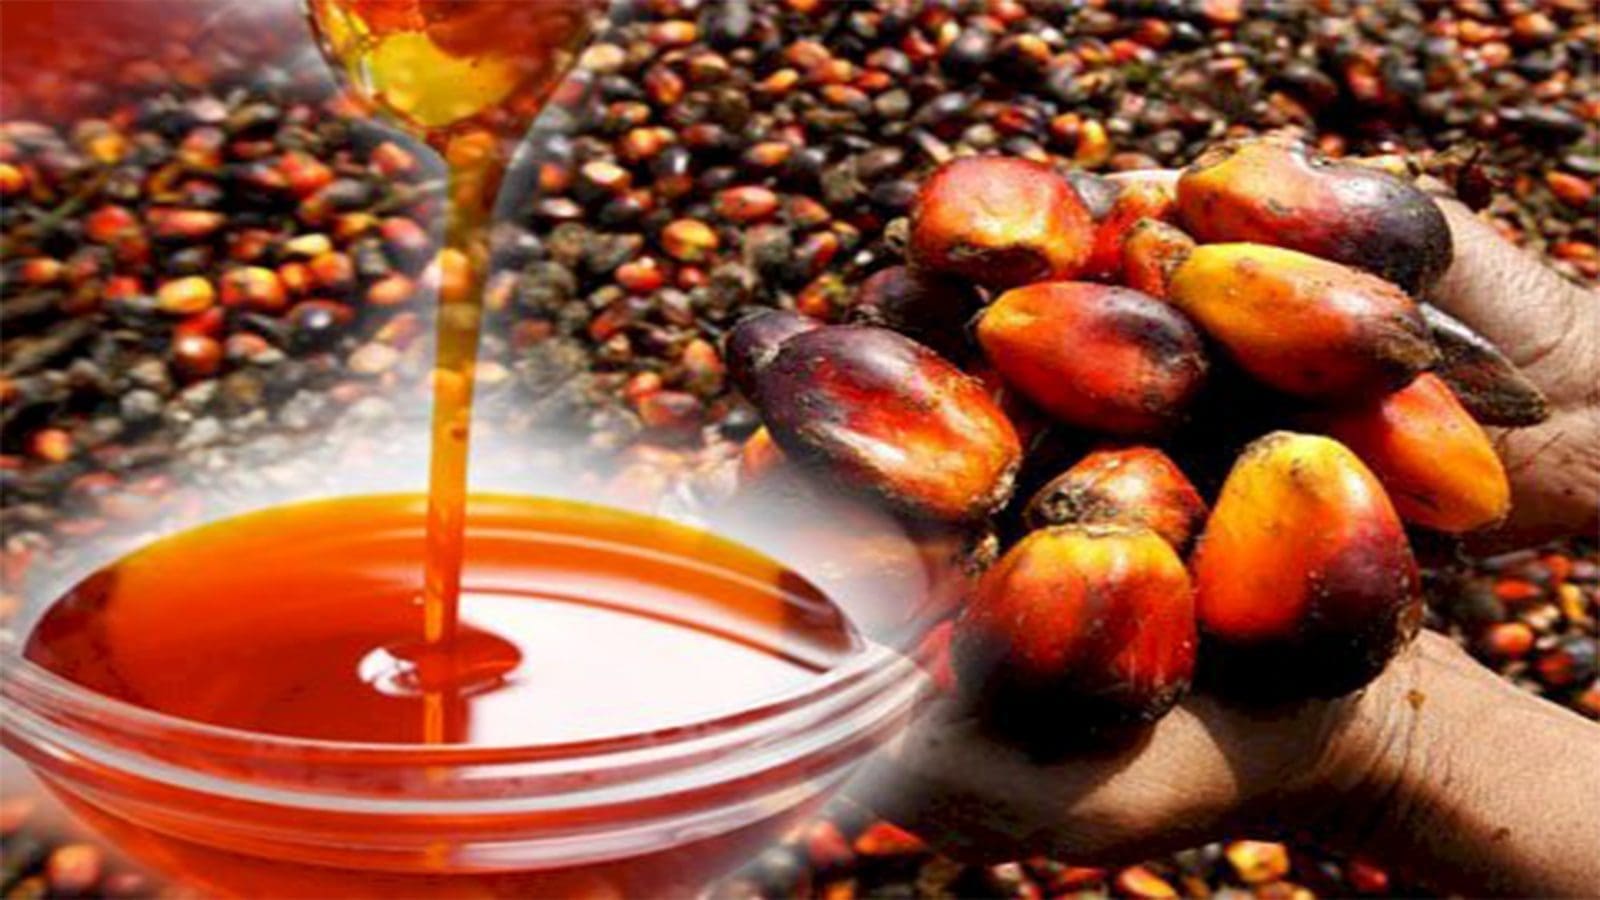 Artisanal Palm Oil Millers and Outgrowers Association launches app to curb palm oil adulteration